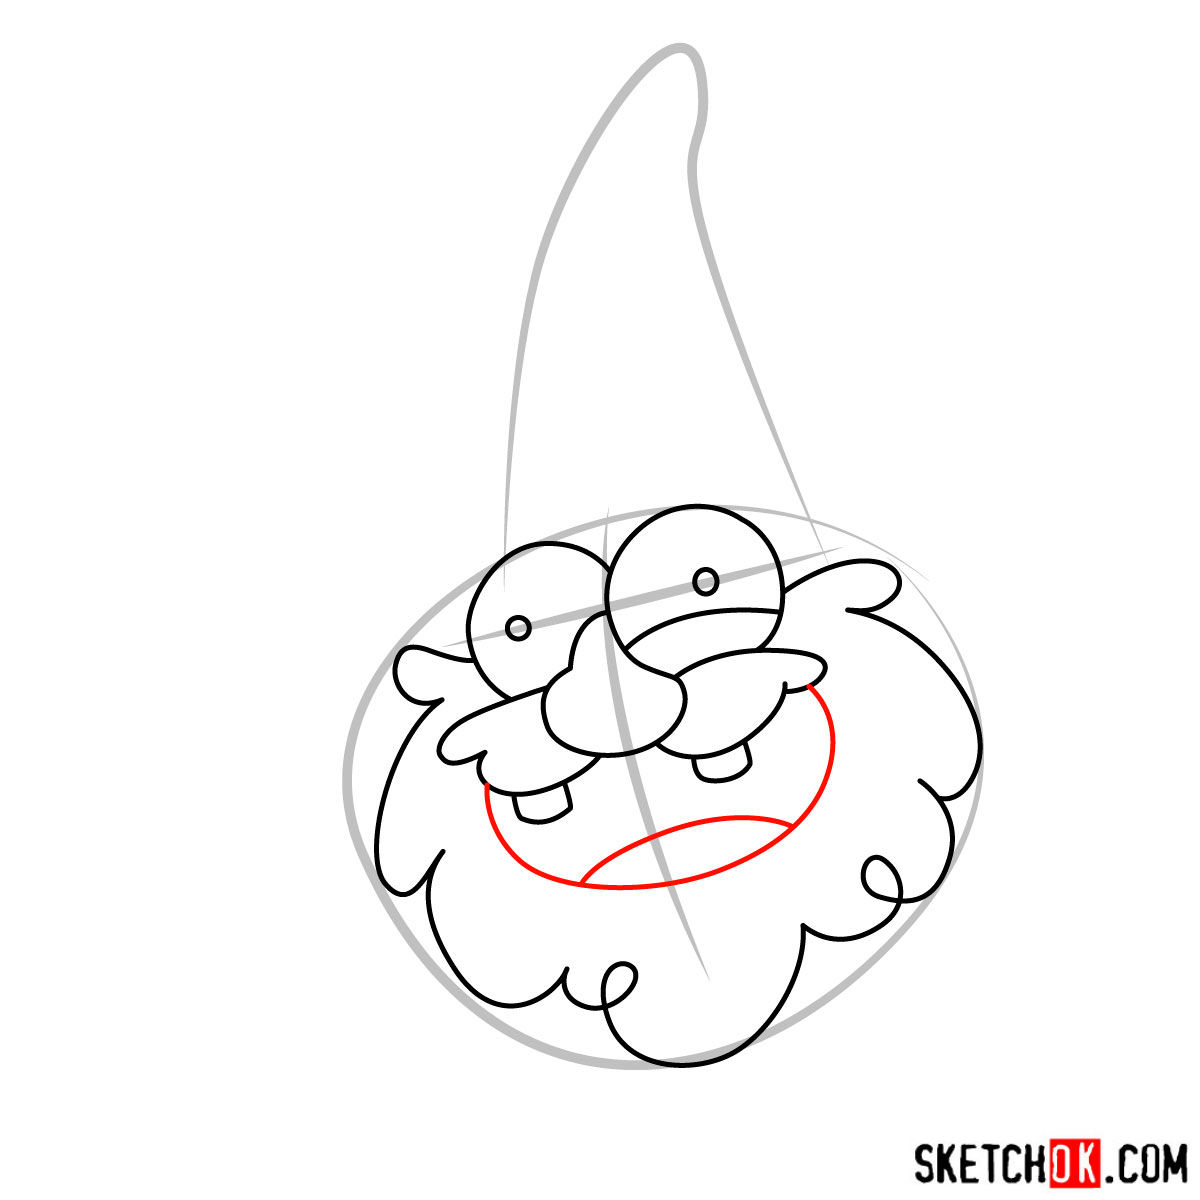 How to draw Gnome from Gravity Falls - step 04